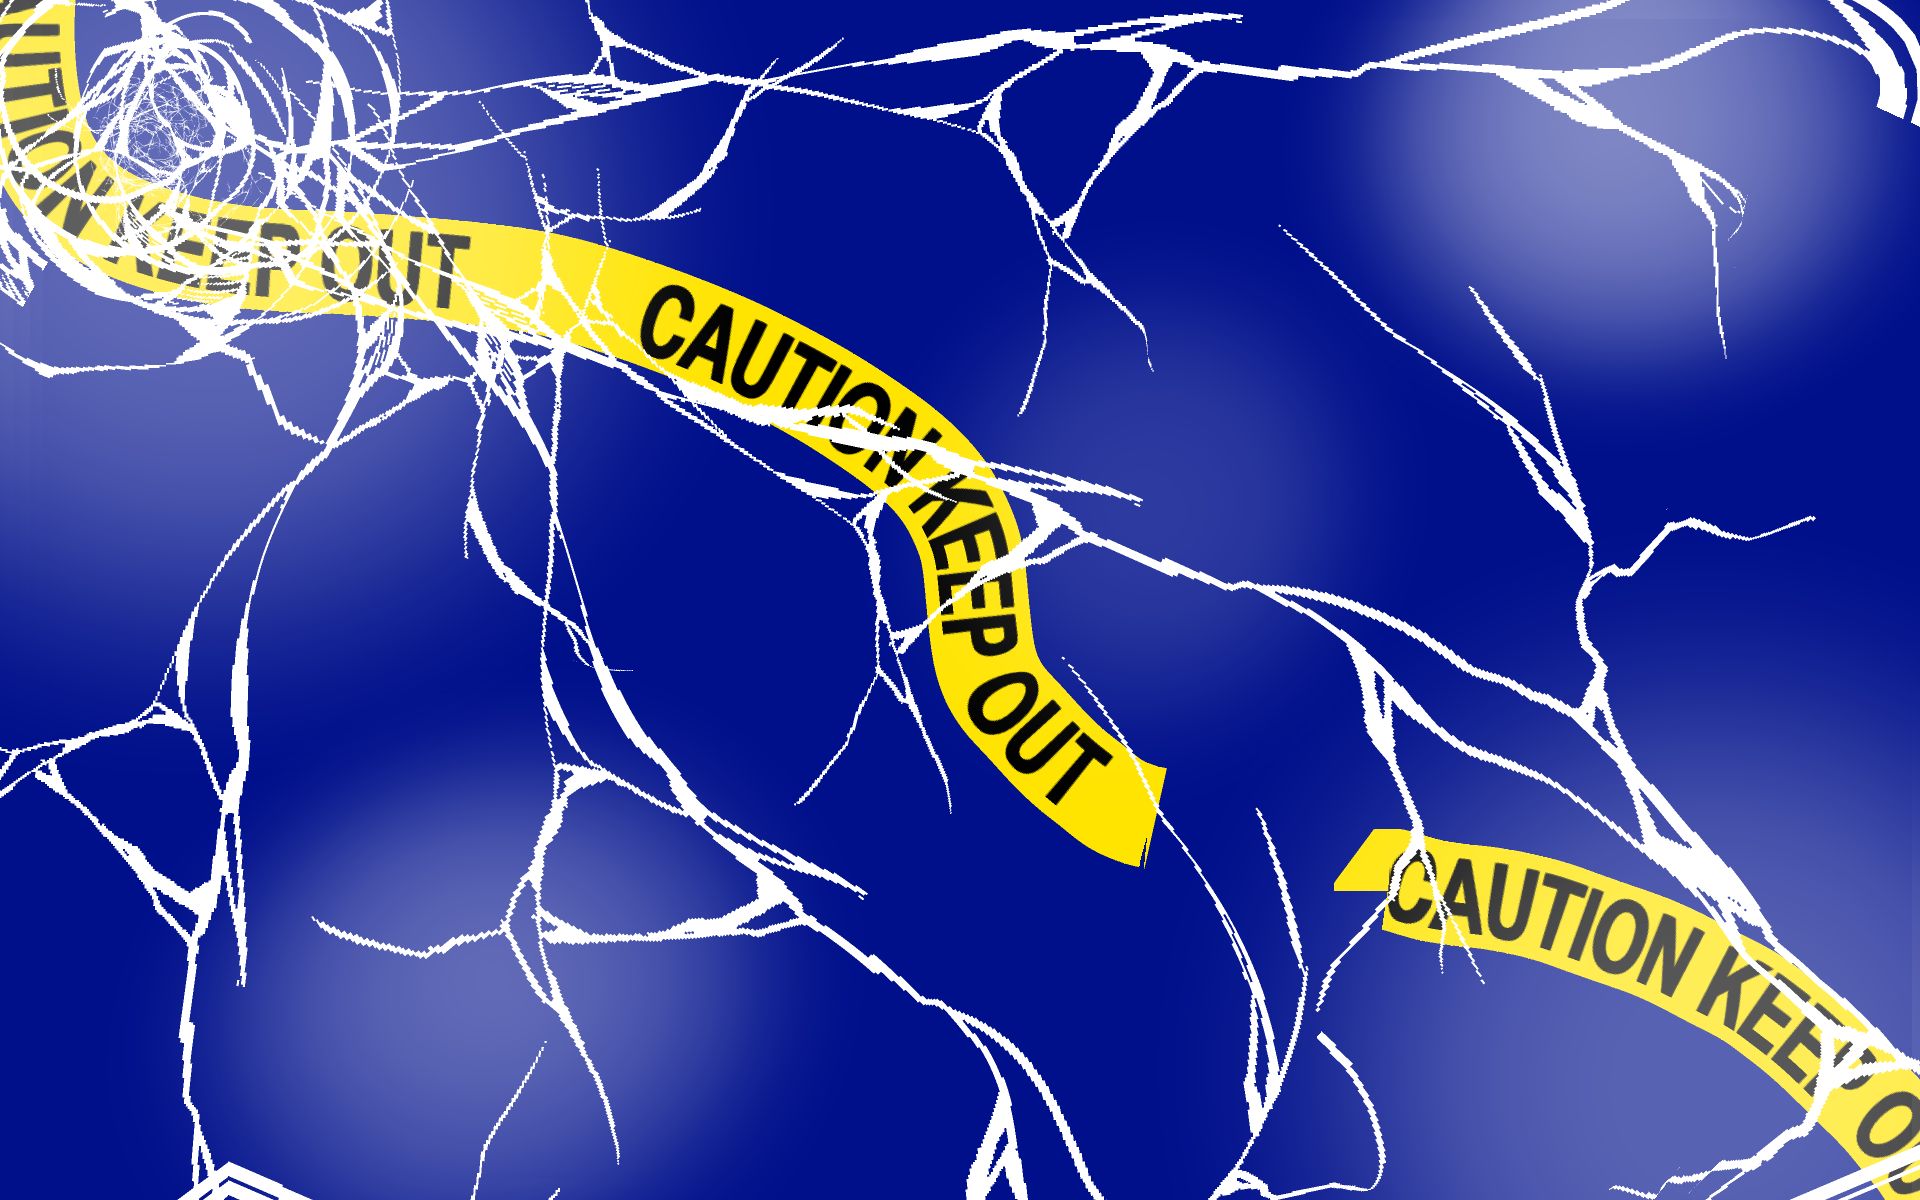 Cracked Screen Wallpaper Caution tape by vee18551 on DeviantArt